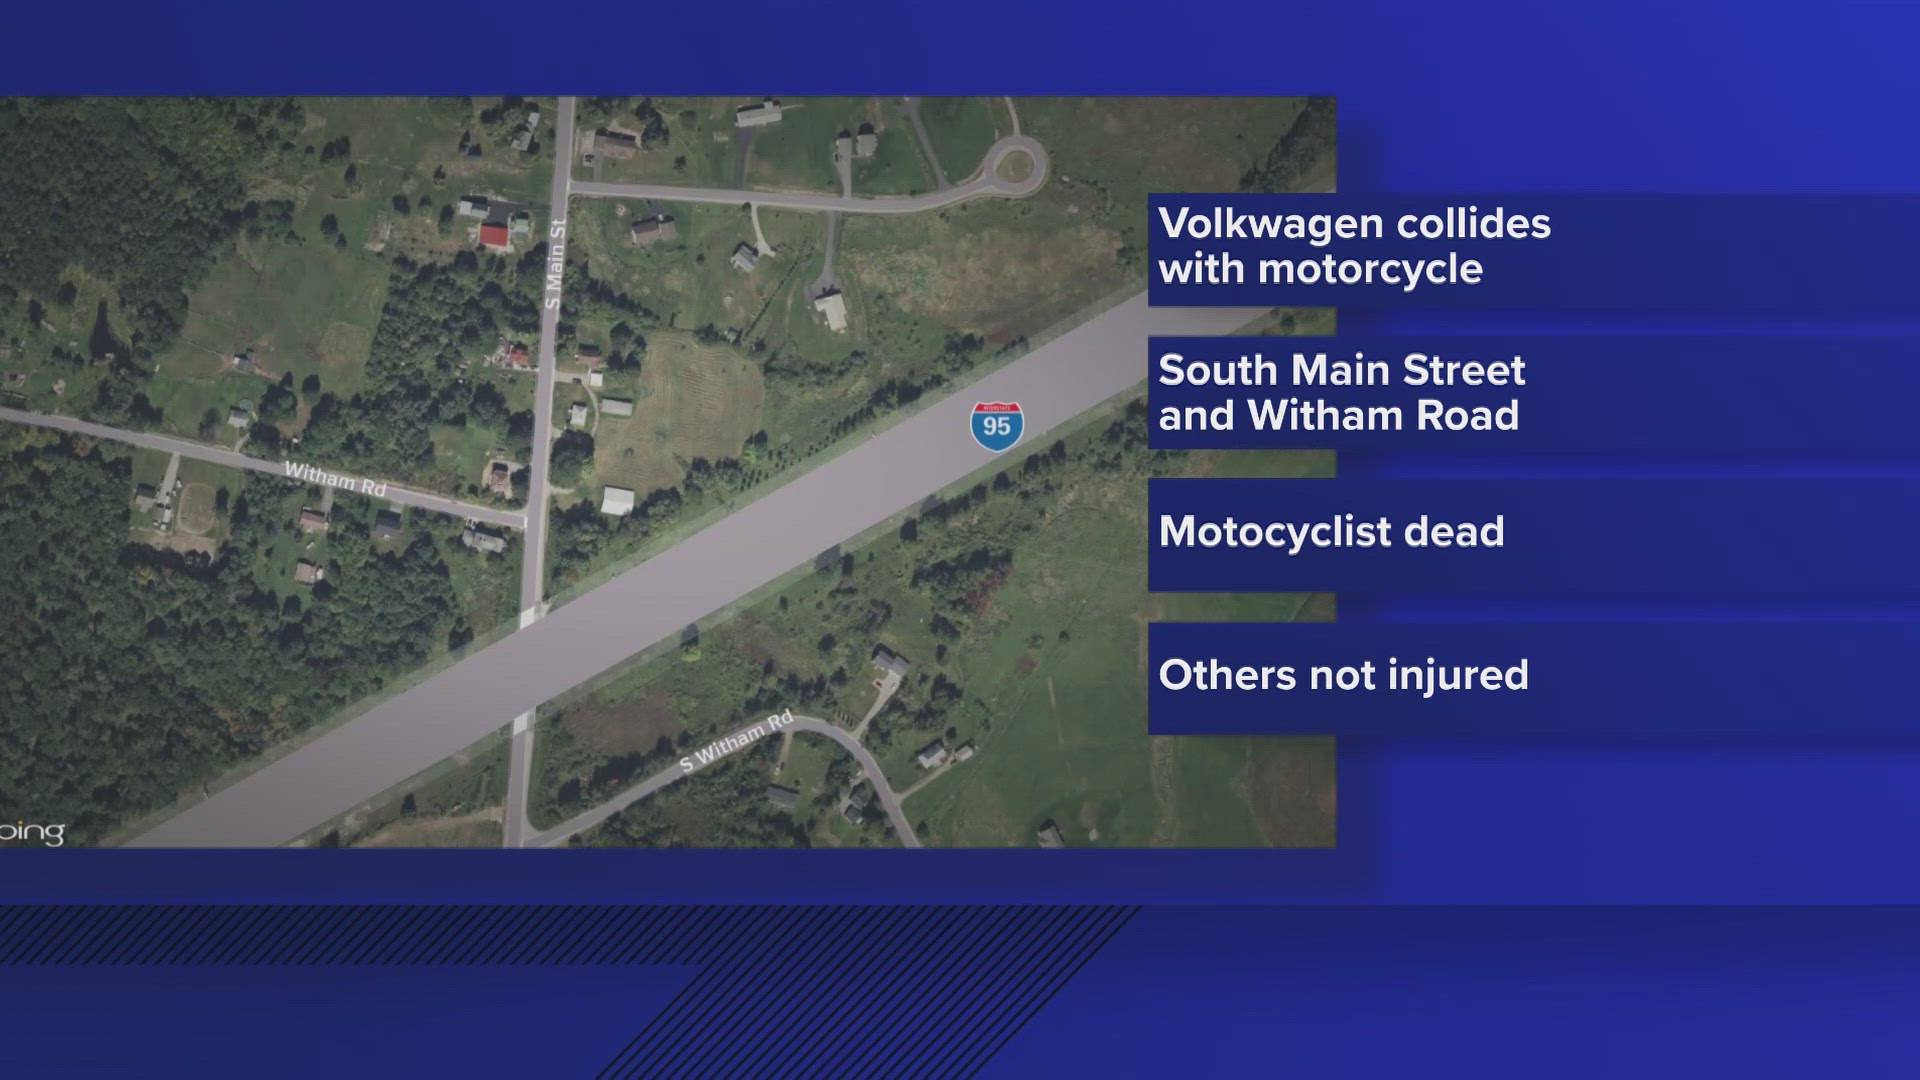 Police said witnesses at the scene tried to provide medical care to the motorcyclist, but they did not survive.